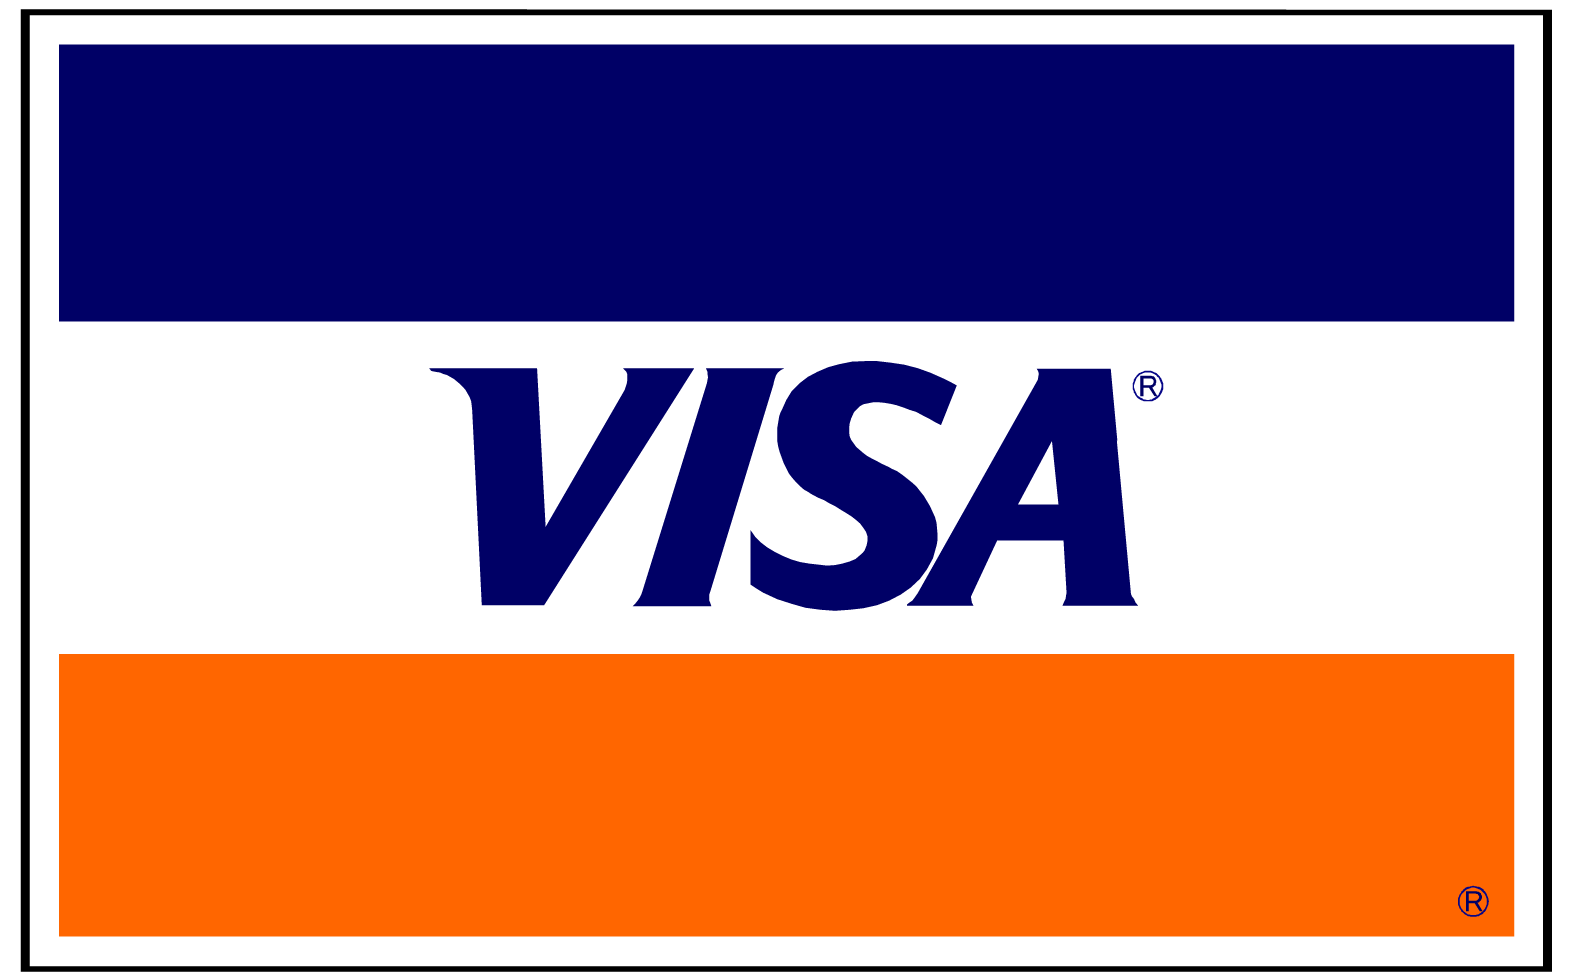 Bank of America adopts the name VISA for their credit cards